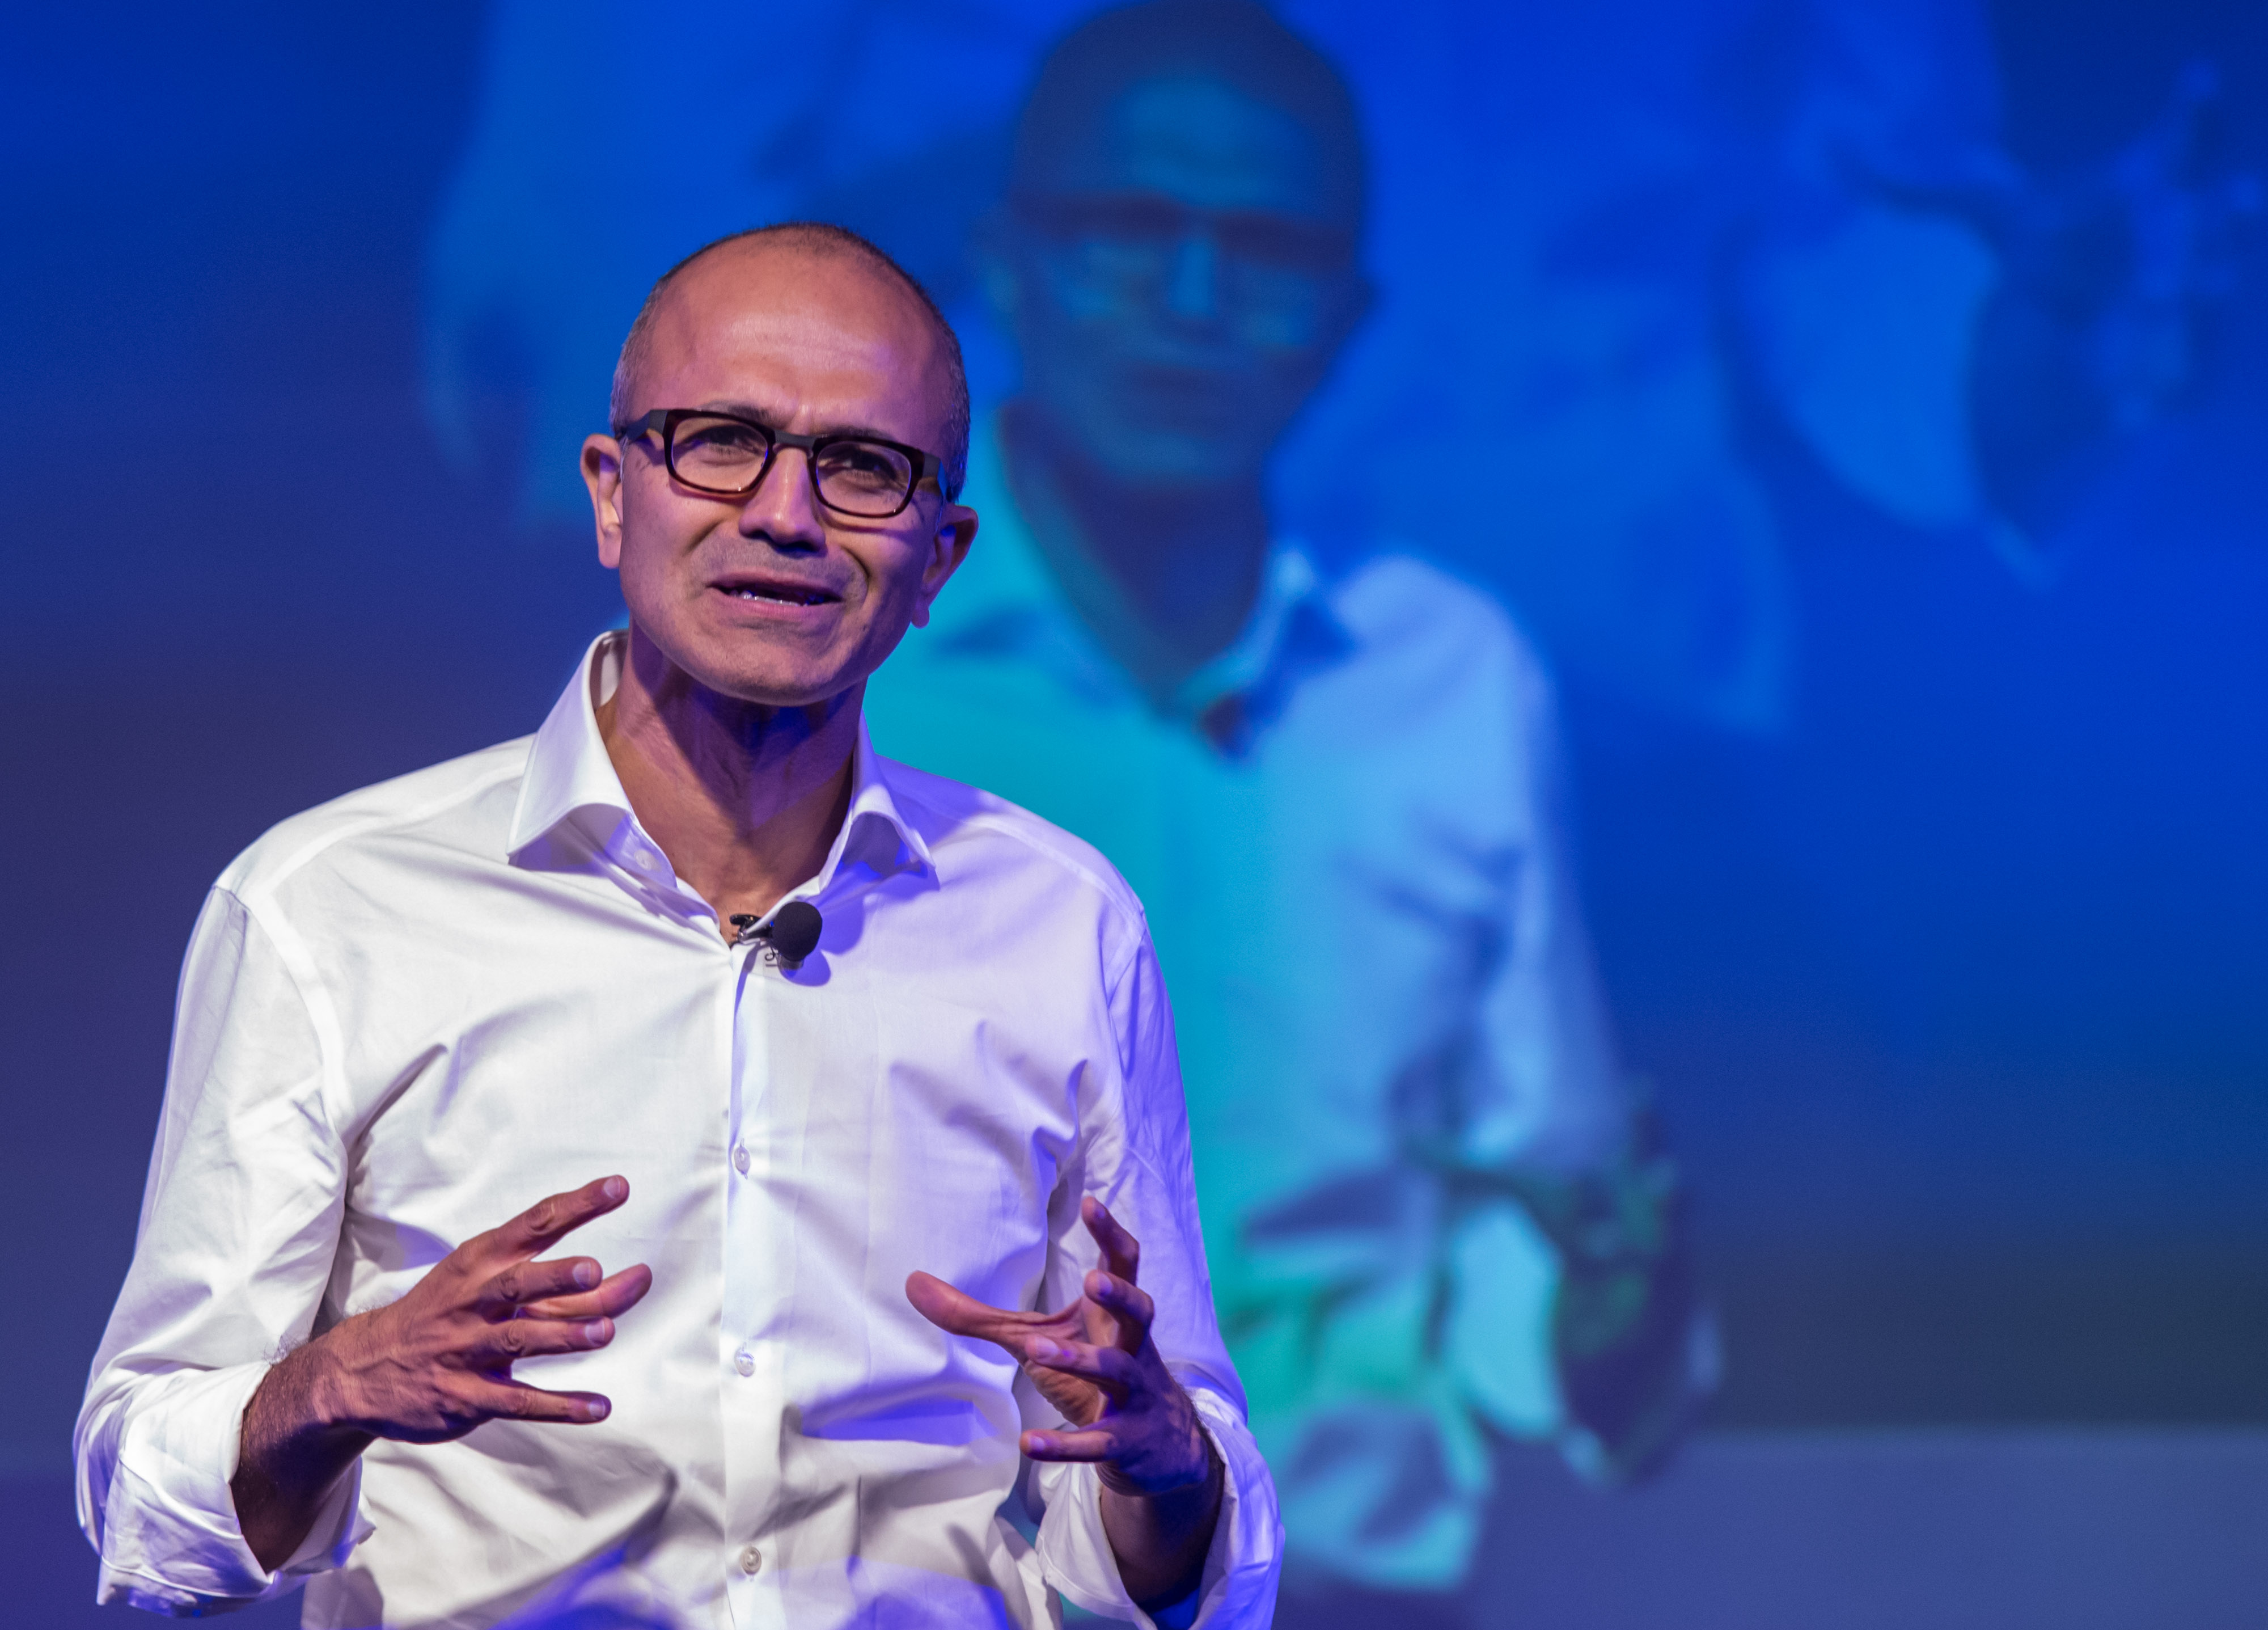 Satya Nadella, chief executive officer of Microsoft Corp., speaks to students during the Microsoft Talent India conference in New Delhi, India, on Tuesday, Sept. 30, 2014. (Bloomberg&amp;mdash;Bloomberg via Getty Images)